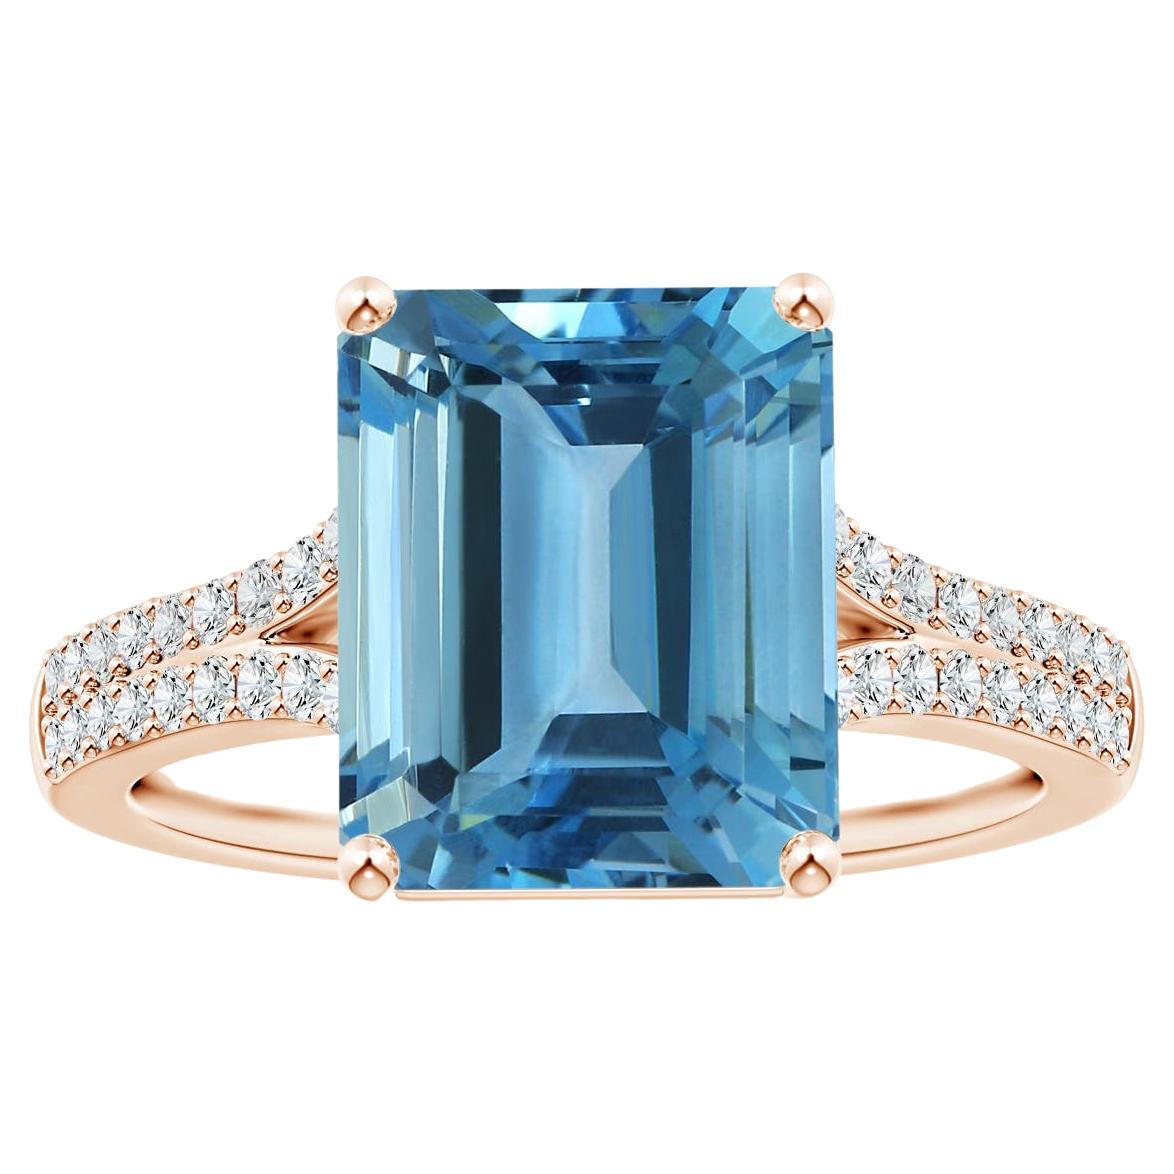 For Sale:  ANGARA GIA Certified 5.04ct Aquamarine Ring in 14K Rose Gold with Diamonds